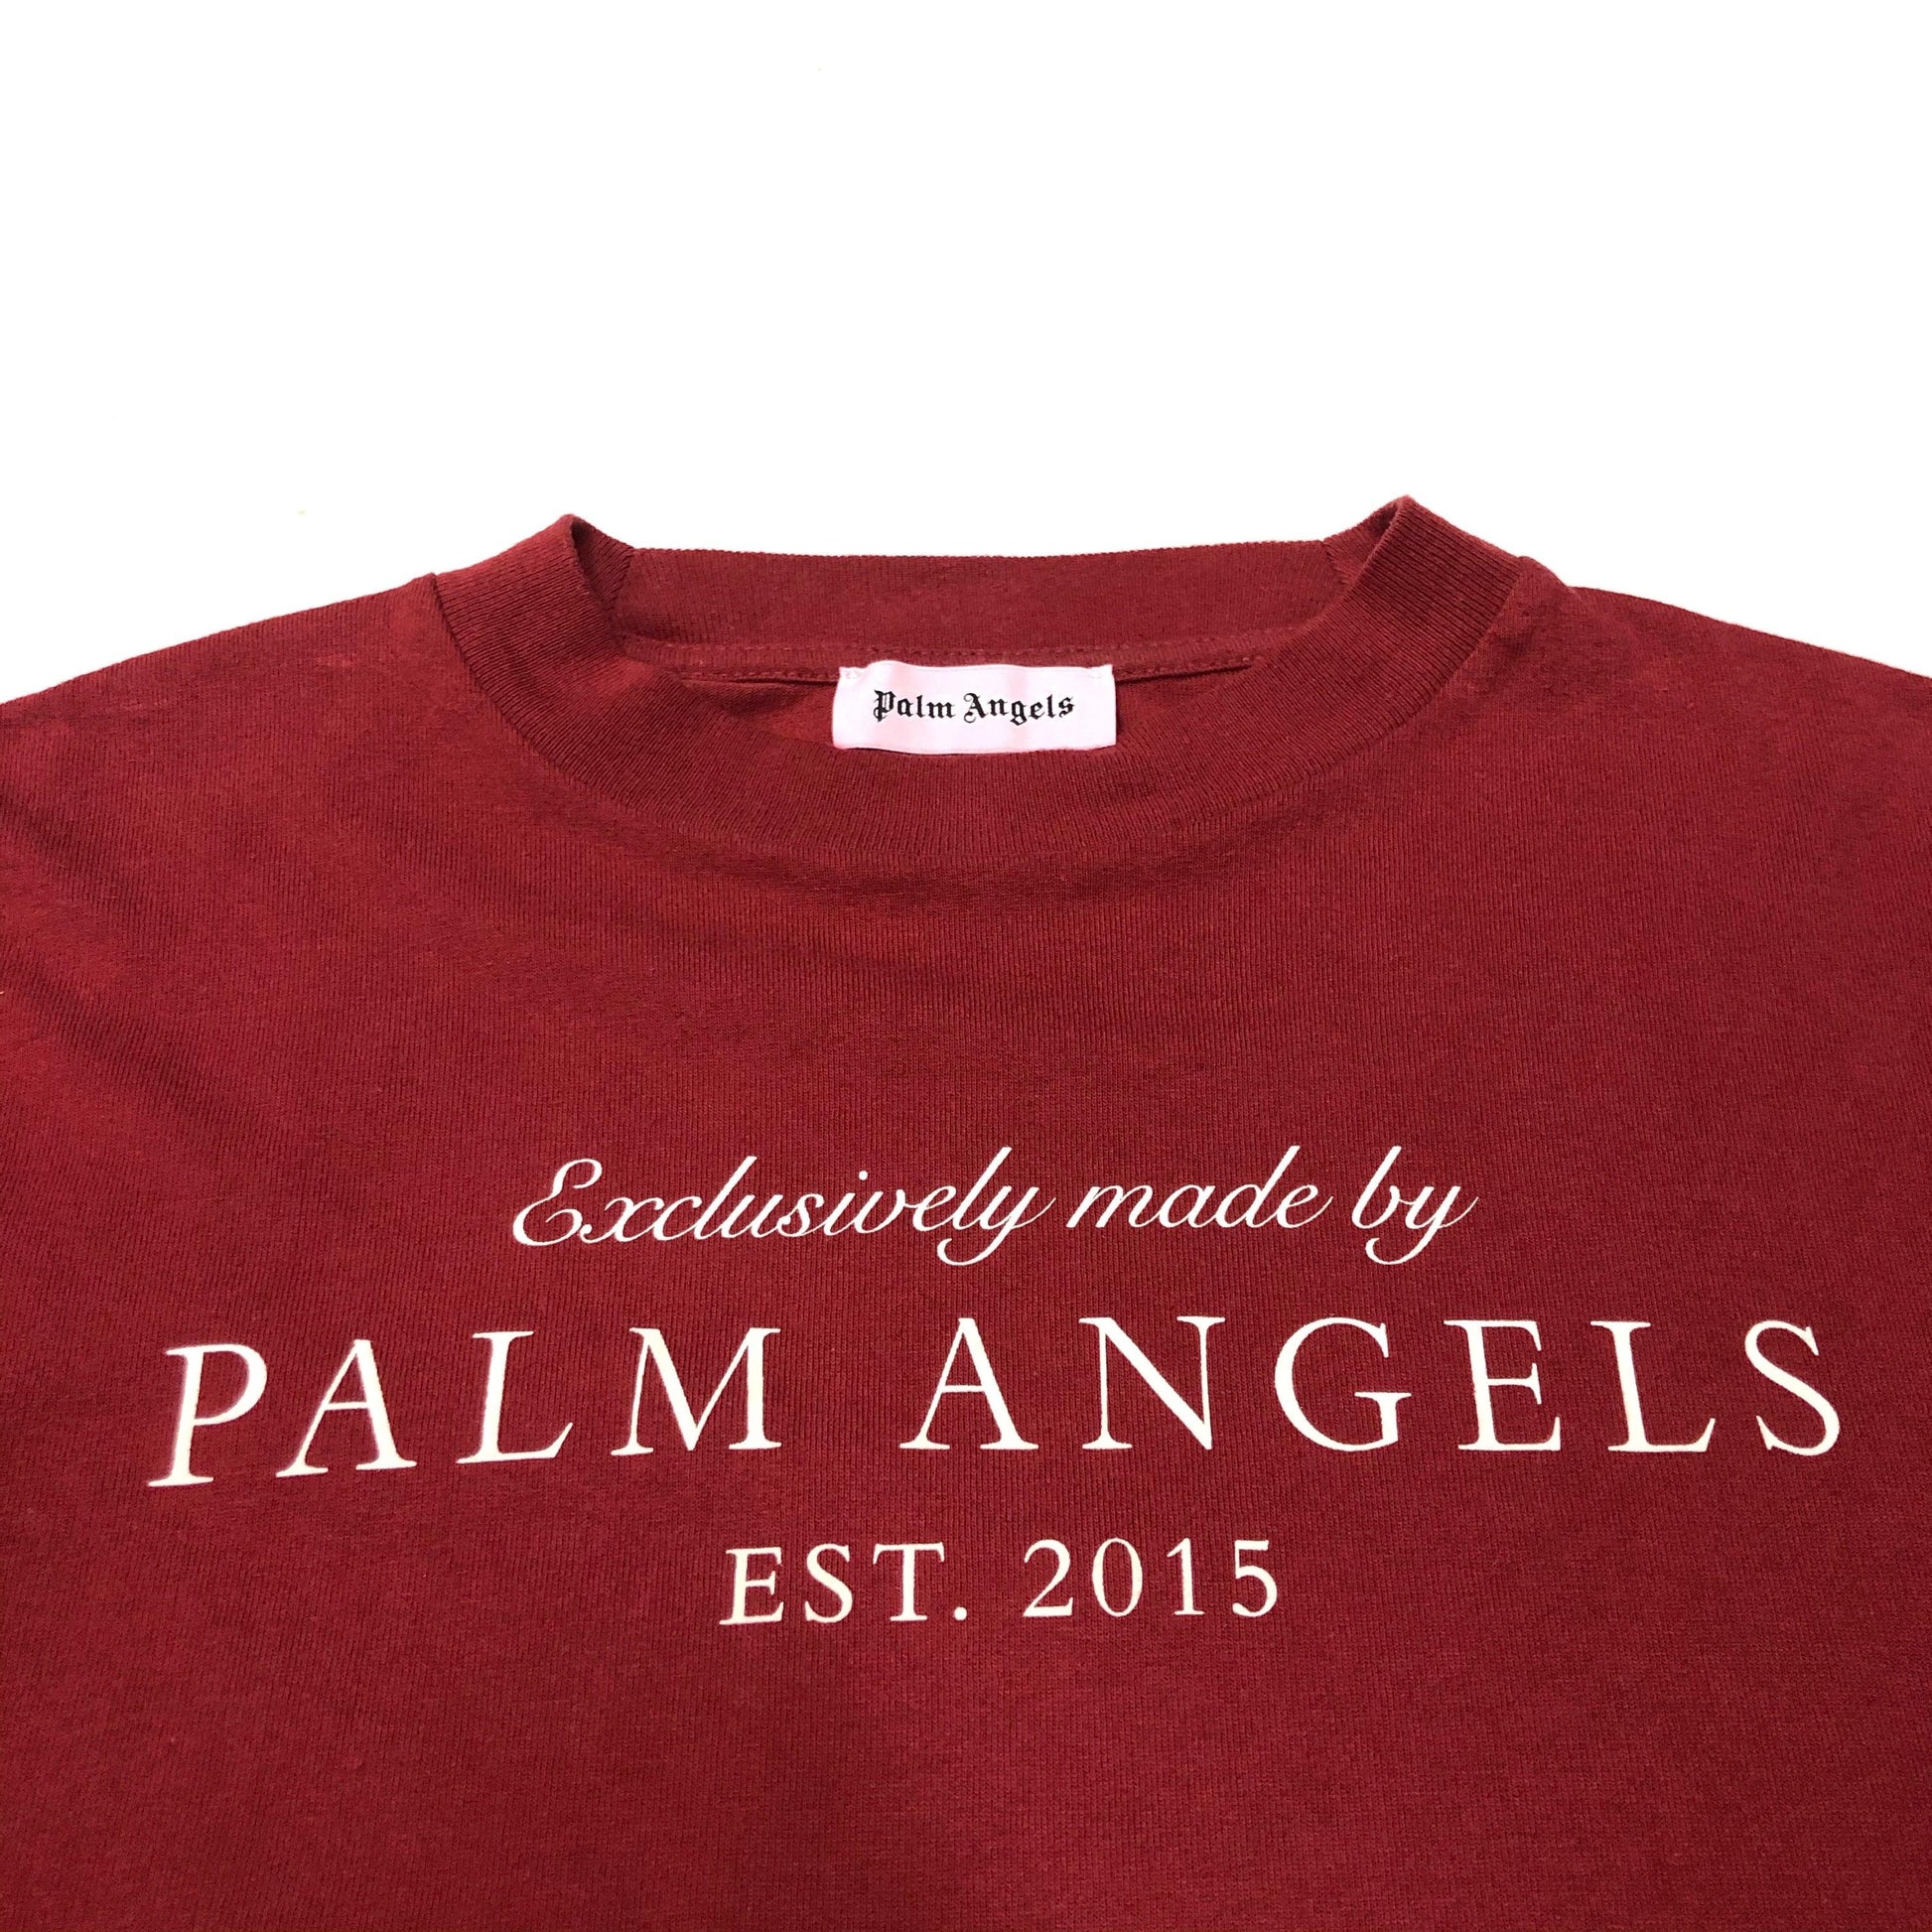 Palm Angels EST 2015 Spell Out Short Sleeved T Shirt with Back Print Initials - Known Source